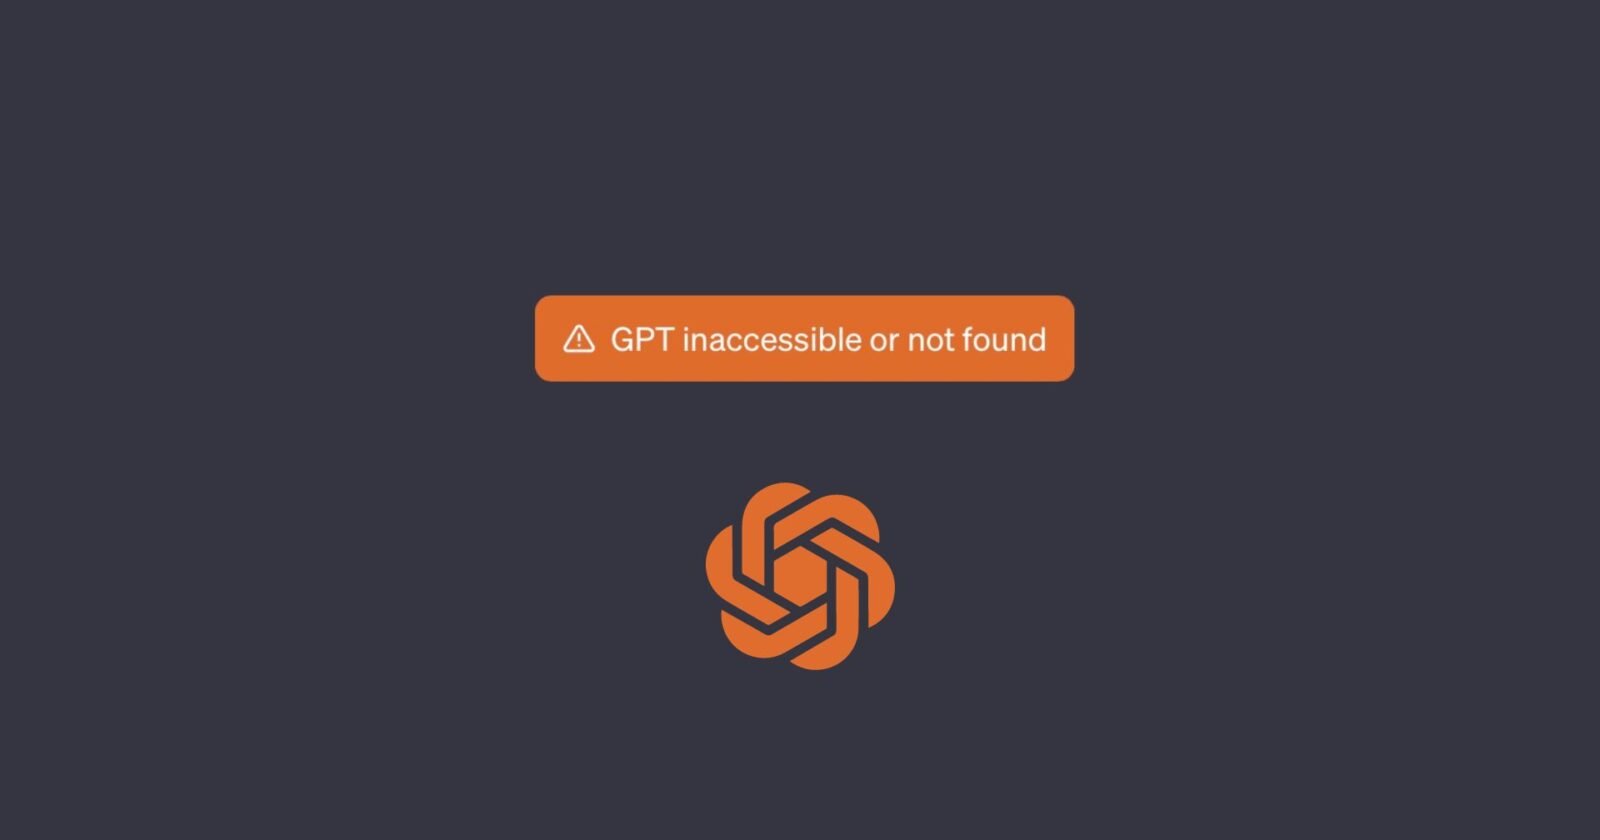 GPT Inaccessible or Not Found